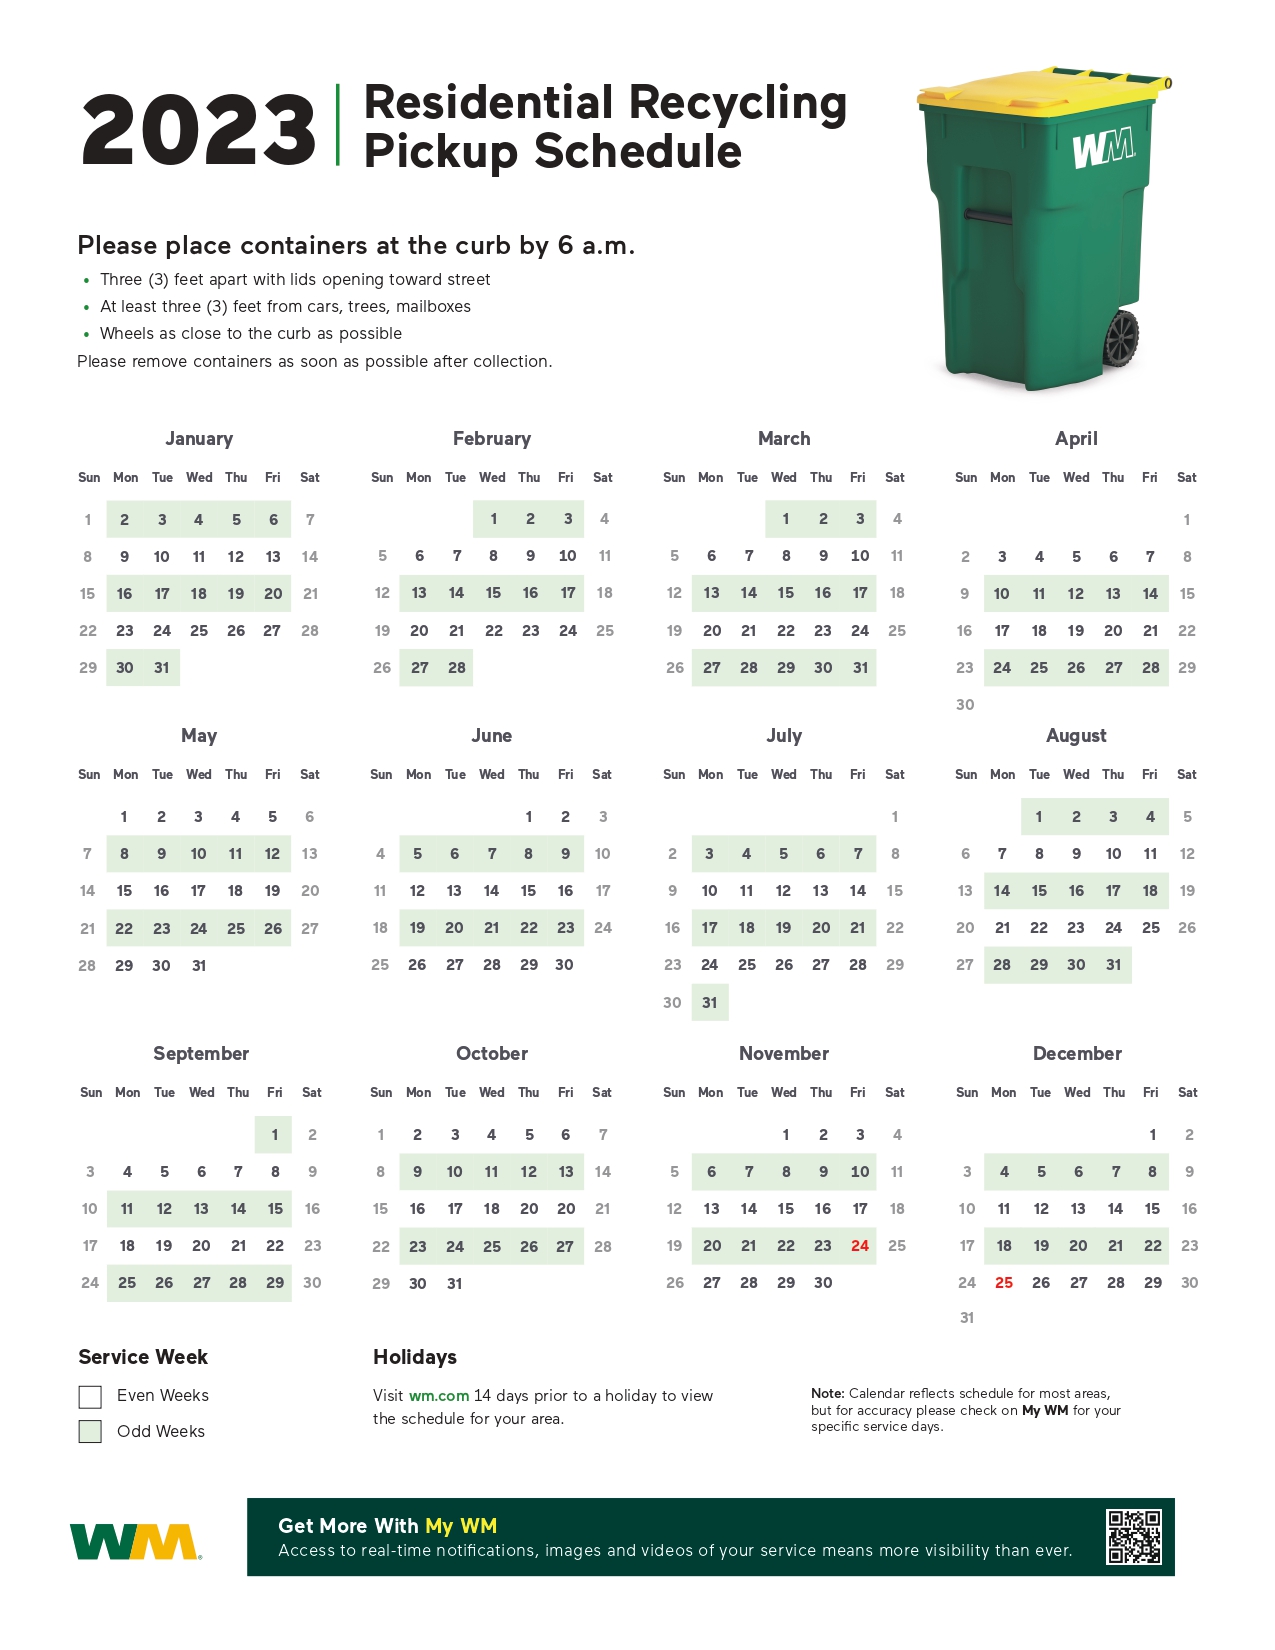 What is my recycling schedule if I'm serviced every other week?